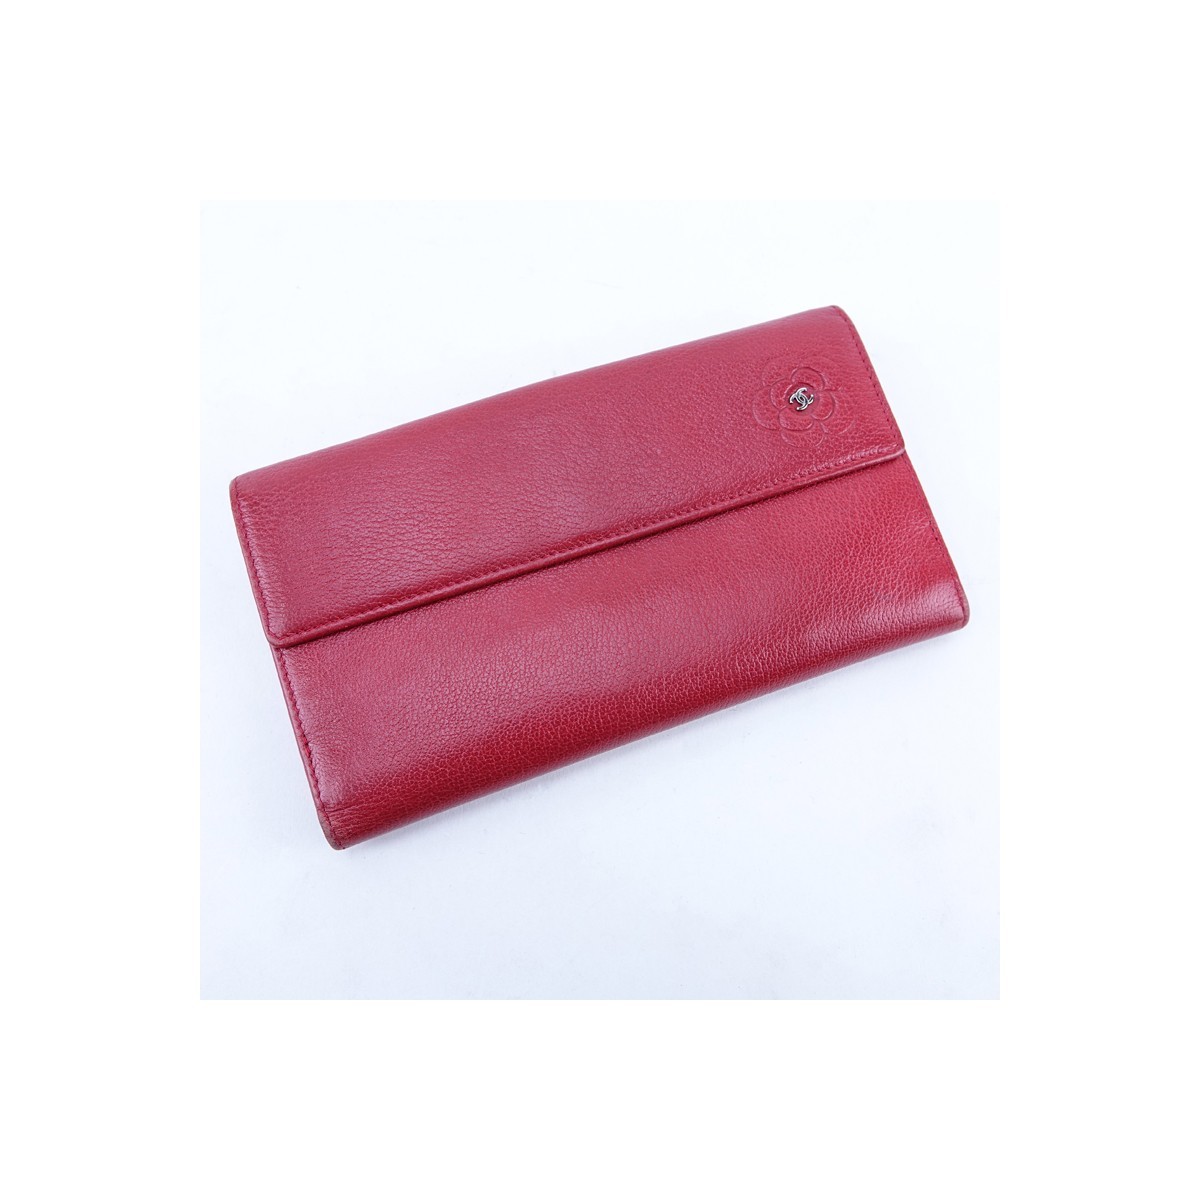 Chanel Red Small Grained Leather Flower Logo Long Wallet. Silver tone hardware, grey fabric interior.